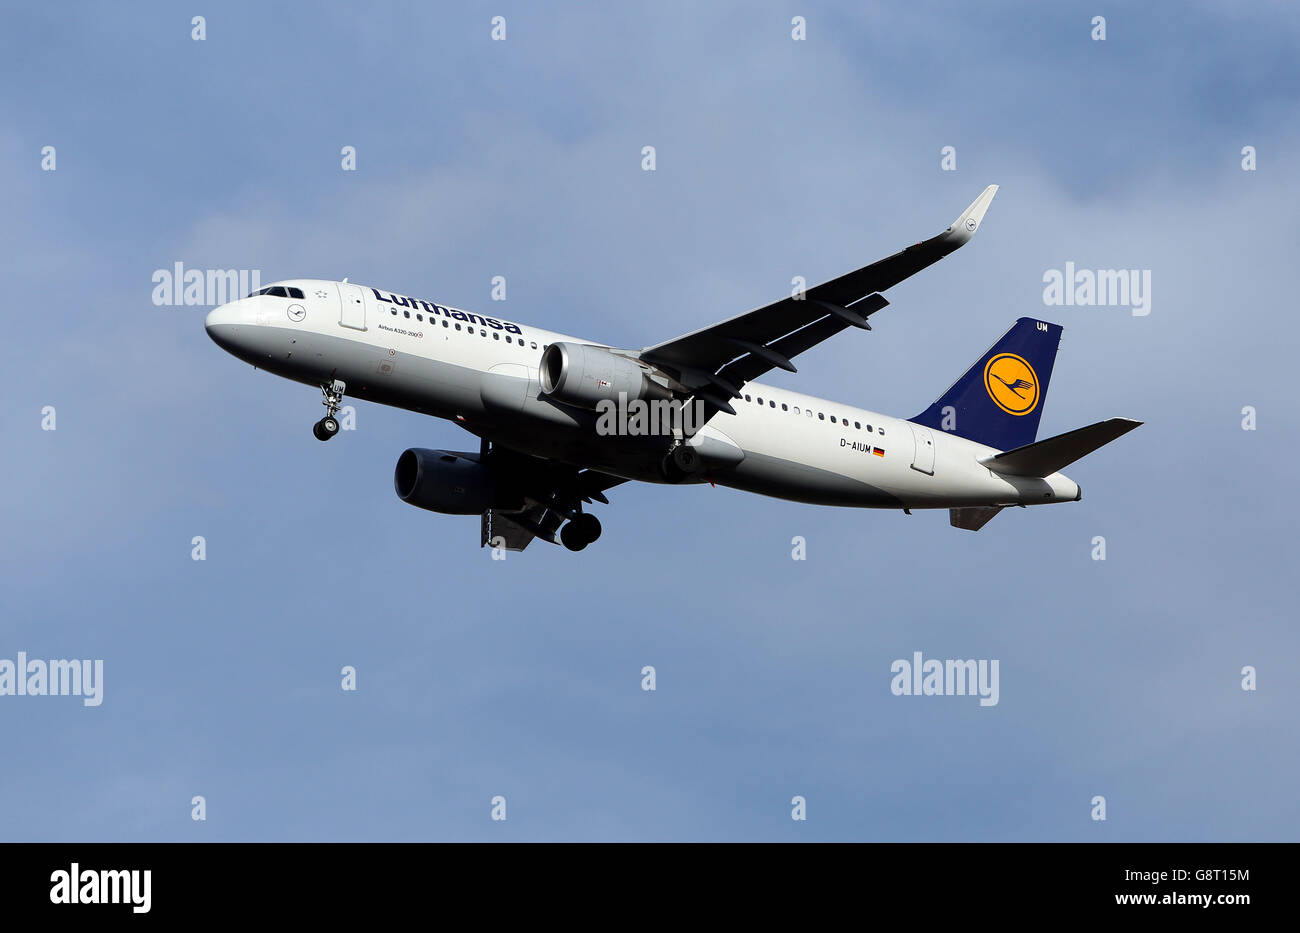 Plane Stock - Heathrow Airport. a Lufthansa Airbus A320-214(WL) plane with the registration D-AIUM lands at Heathrow Stock Photo